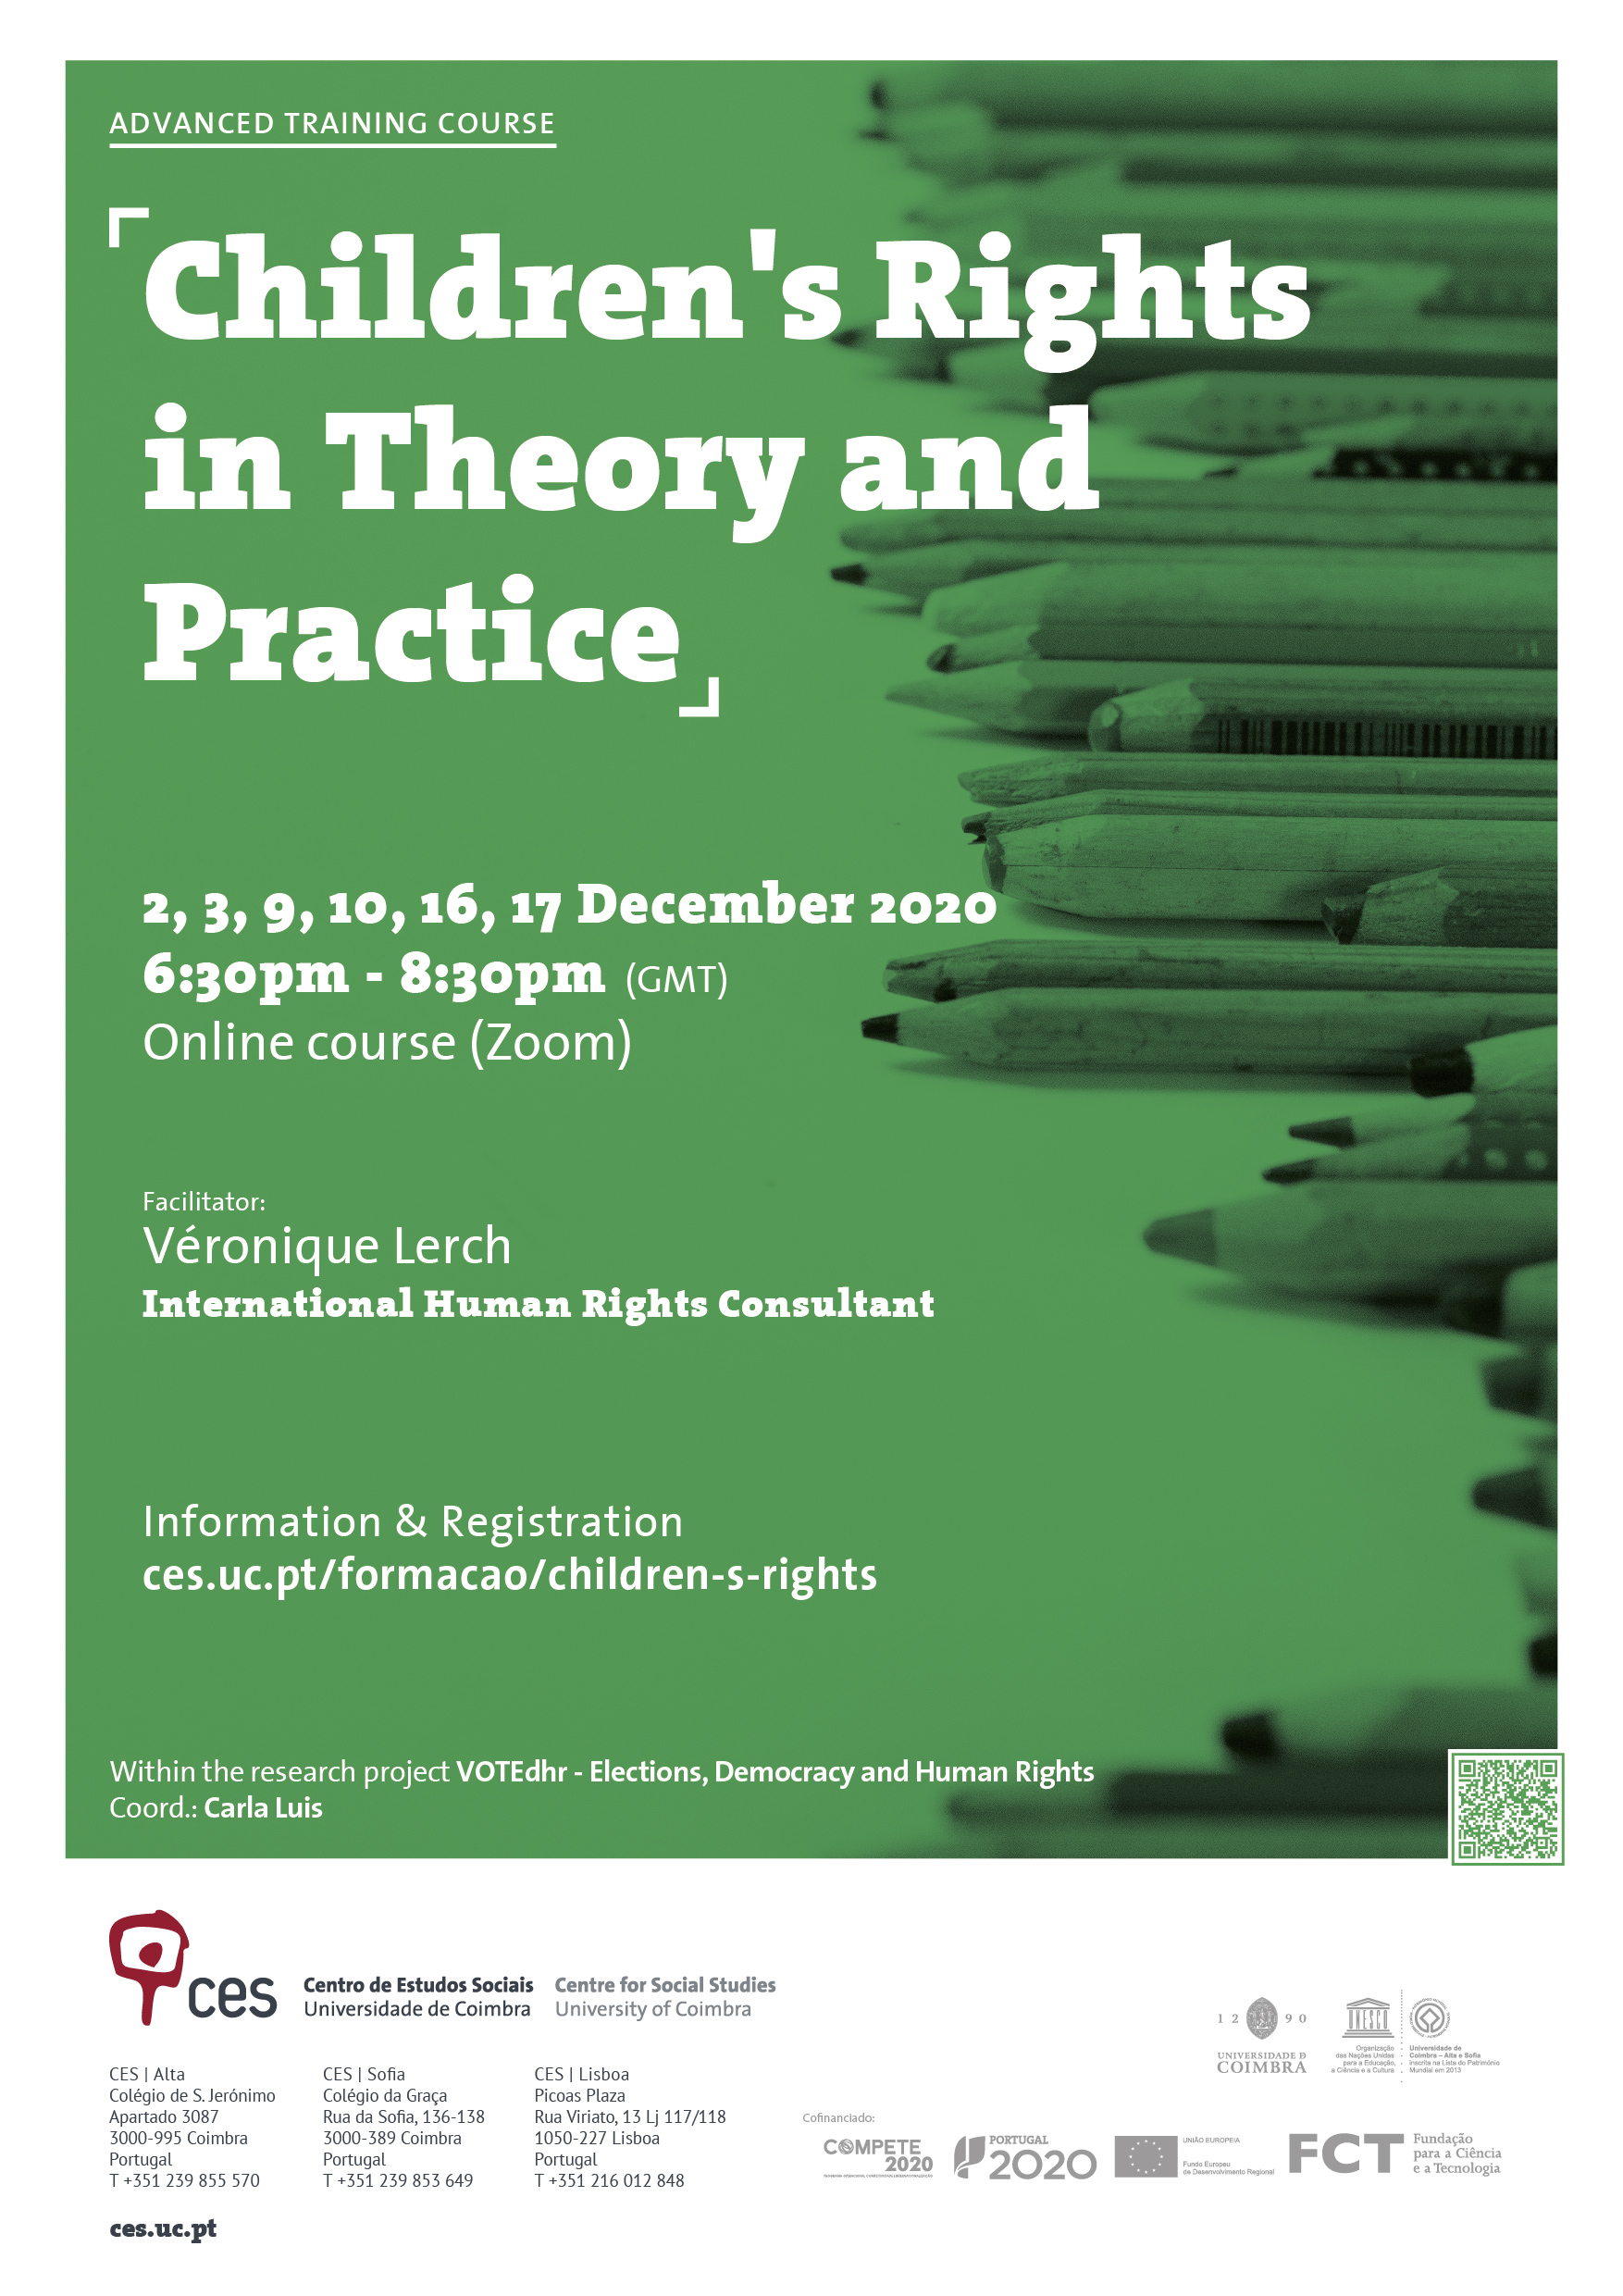 Children's Rights in Theory and Practice<span id="edit_31488"><script>$(function() { $('#edit_31488').load( "/myces/user/editobj.php?tipo=evento&id=31488" ); });</script></span>